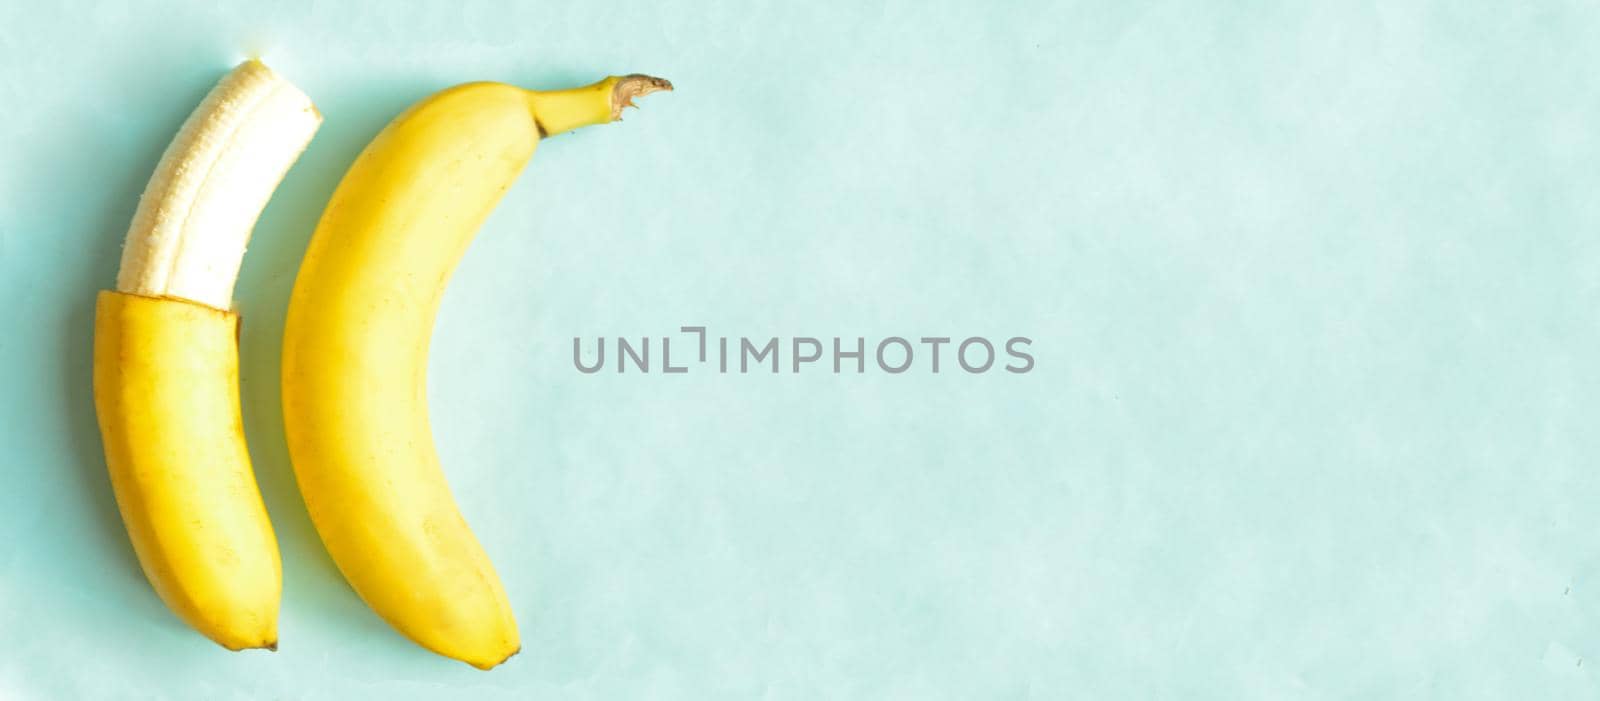 One partially peeled banana and one whole on blue background. by andre_dechapelle